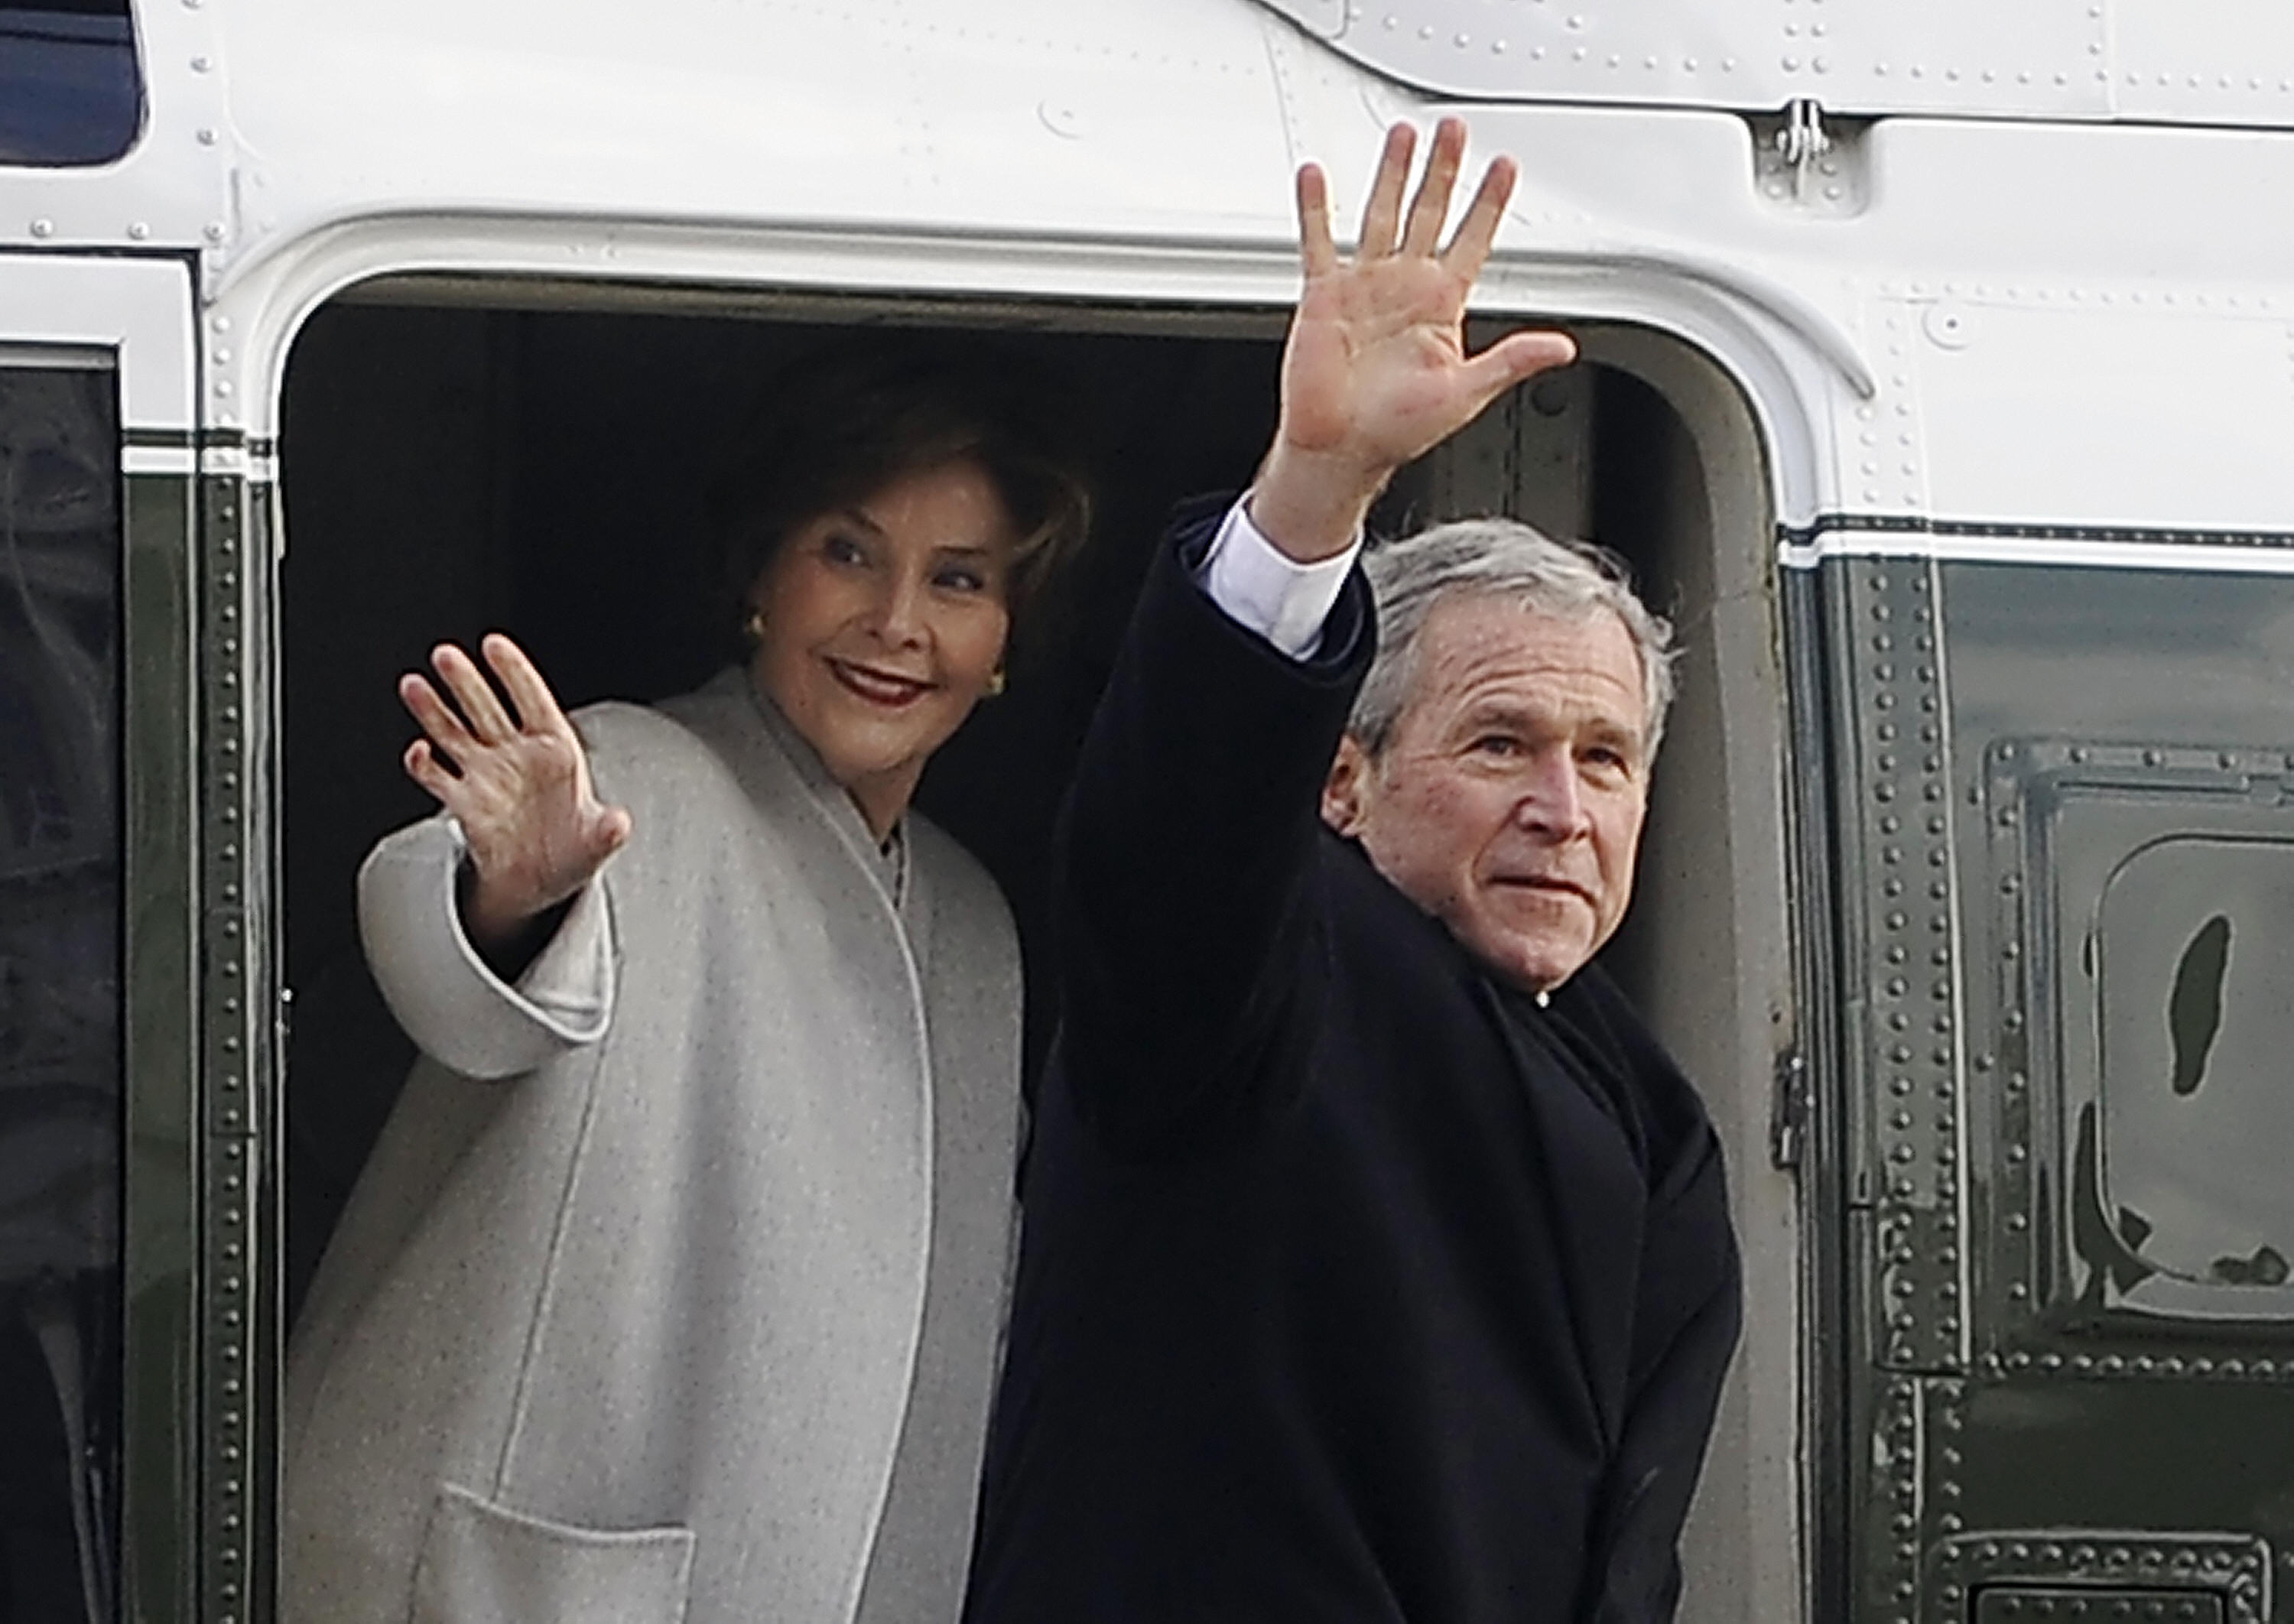 The Bushes depart the White House in 2009